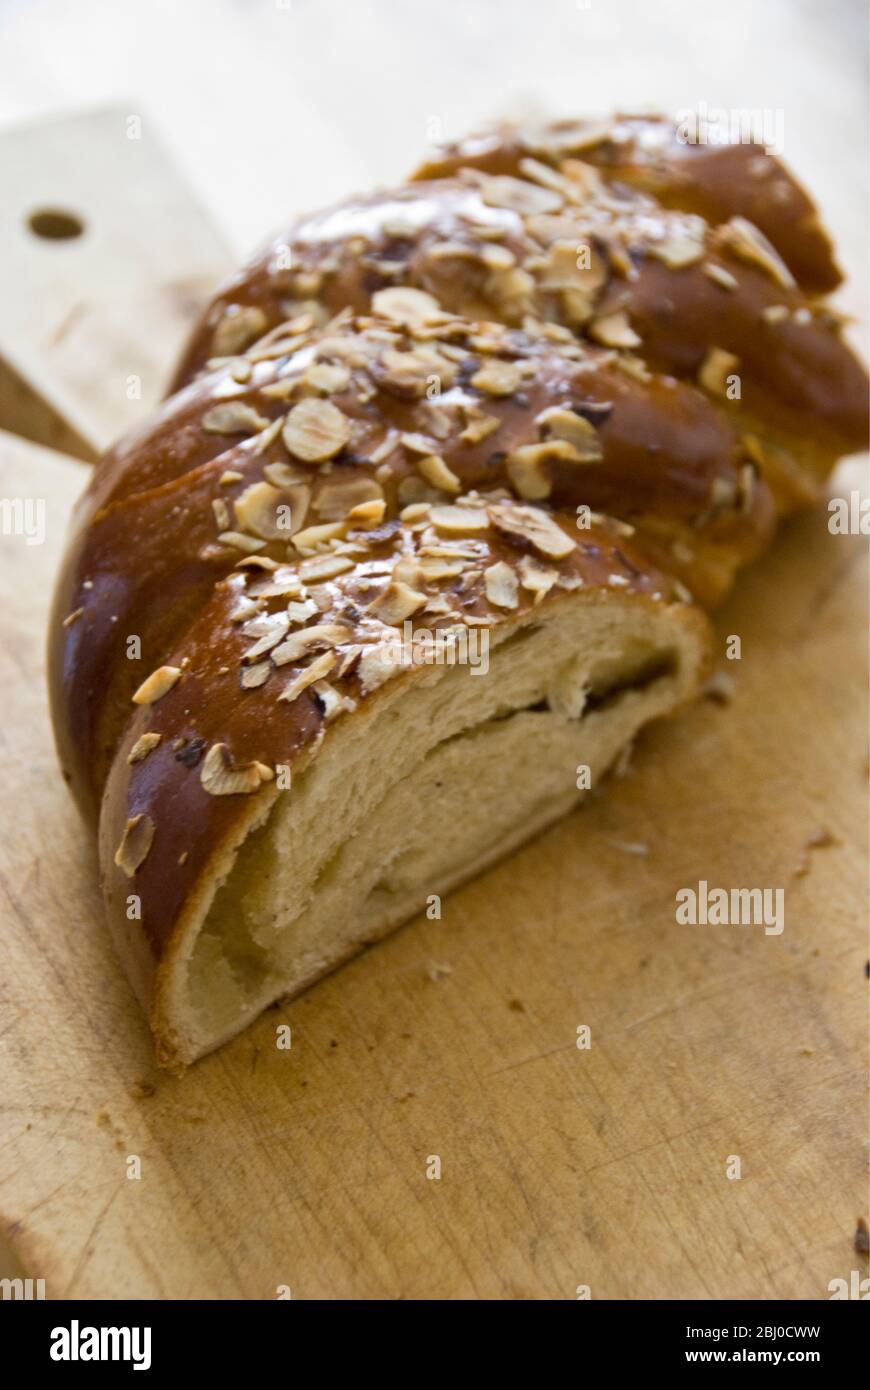 Piece of sweet, yeast bread with almonds and almond paste on wooden board - Stock Photo